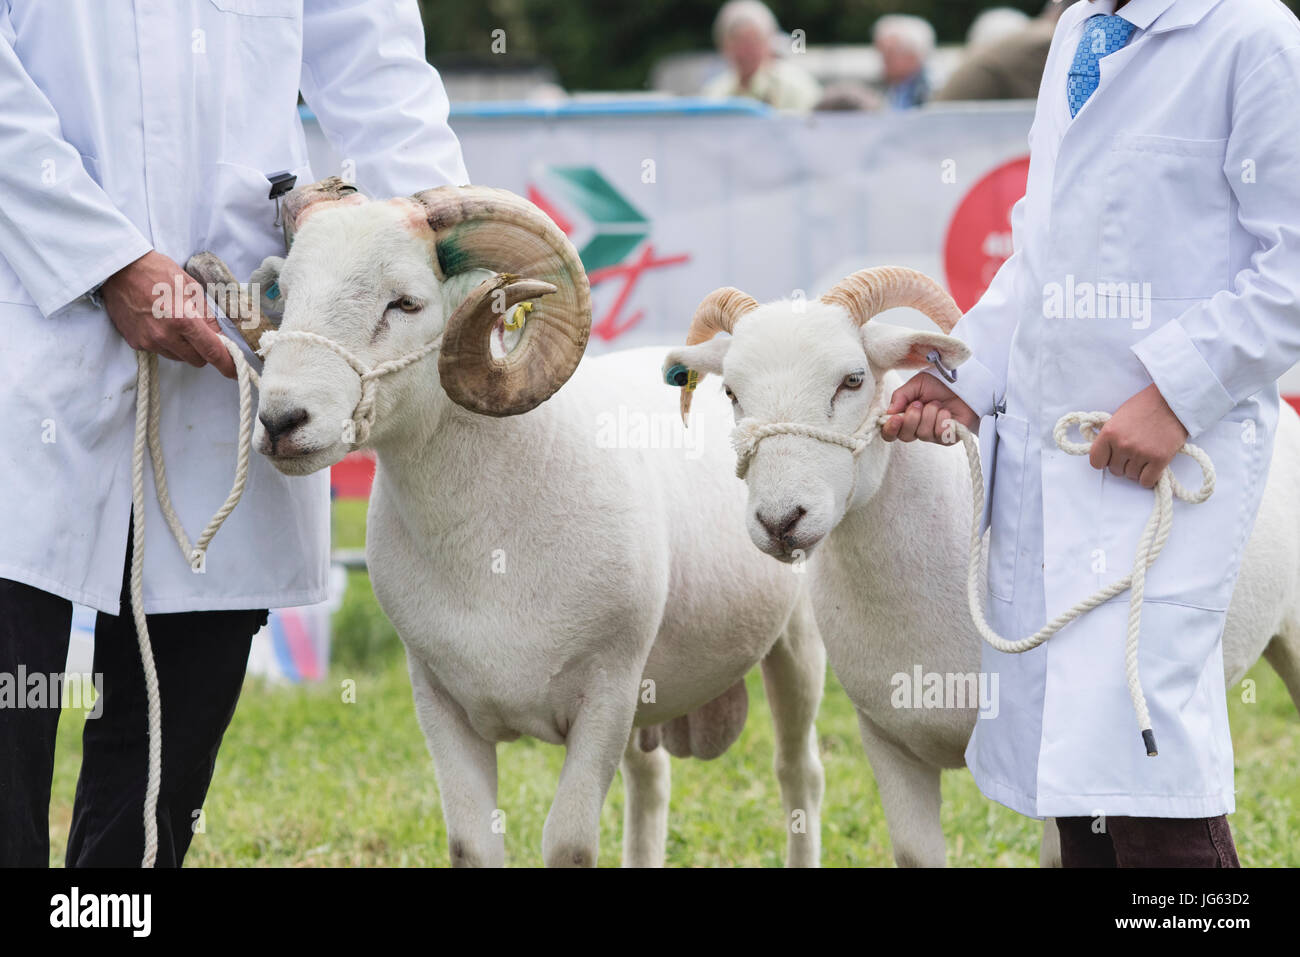 Ovis aries. Wiltshire horned ram / sheep at Hanbury country show, Worcestershire. UK Stock Photo